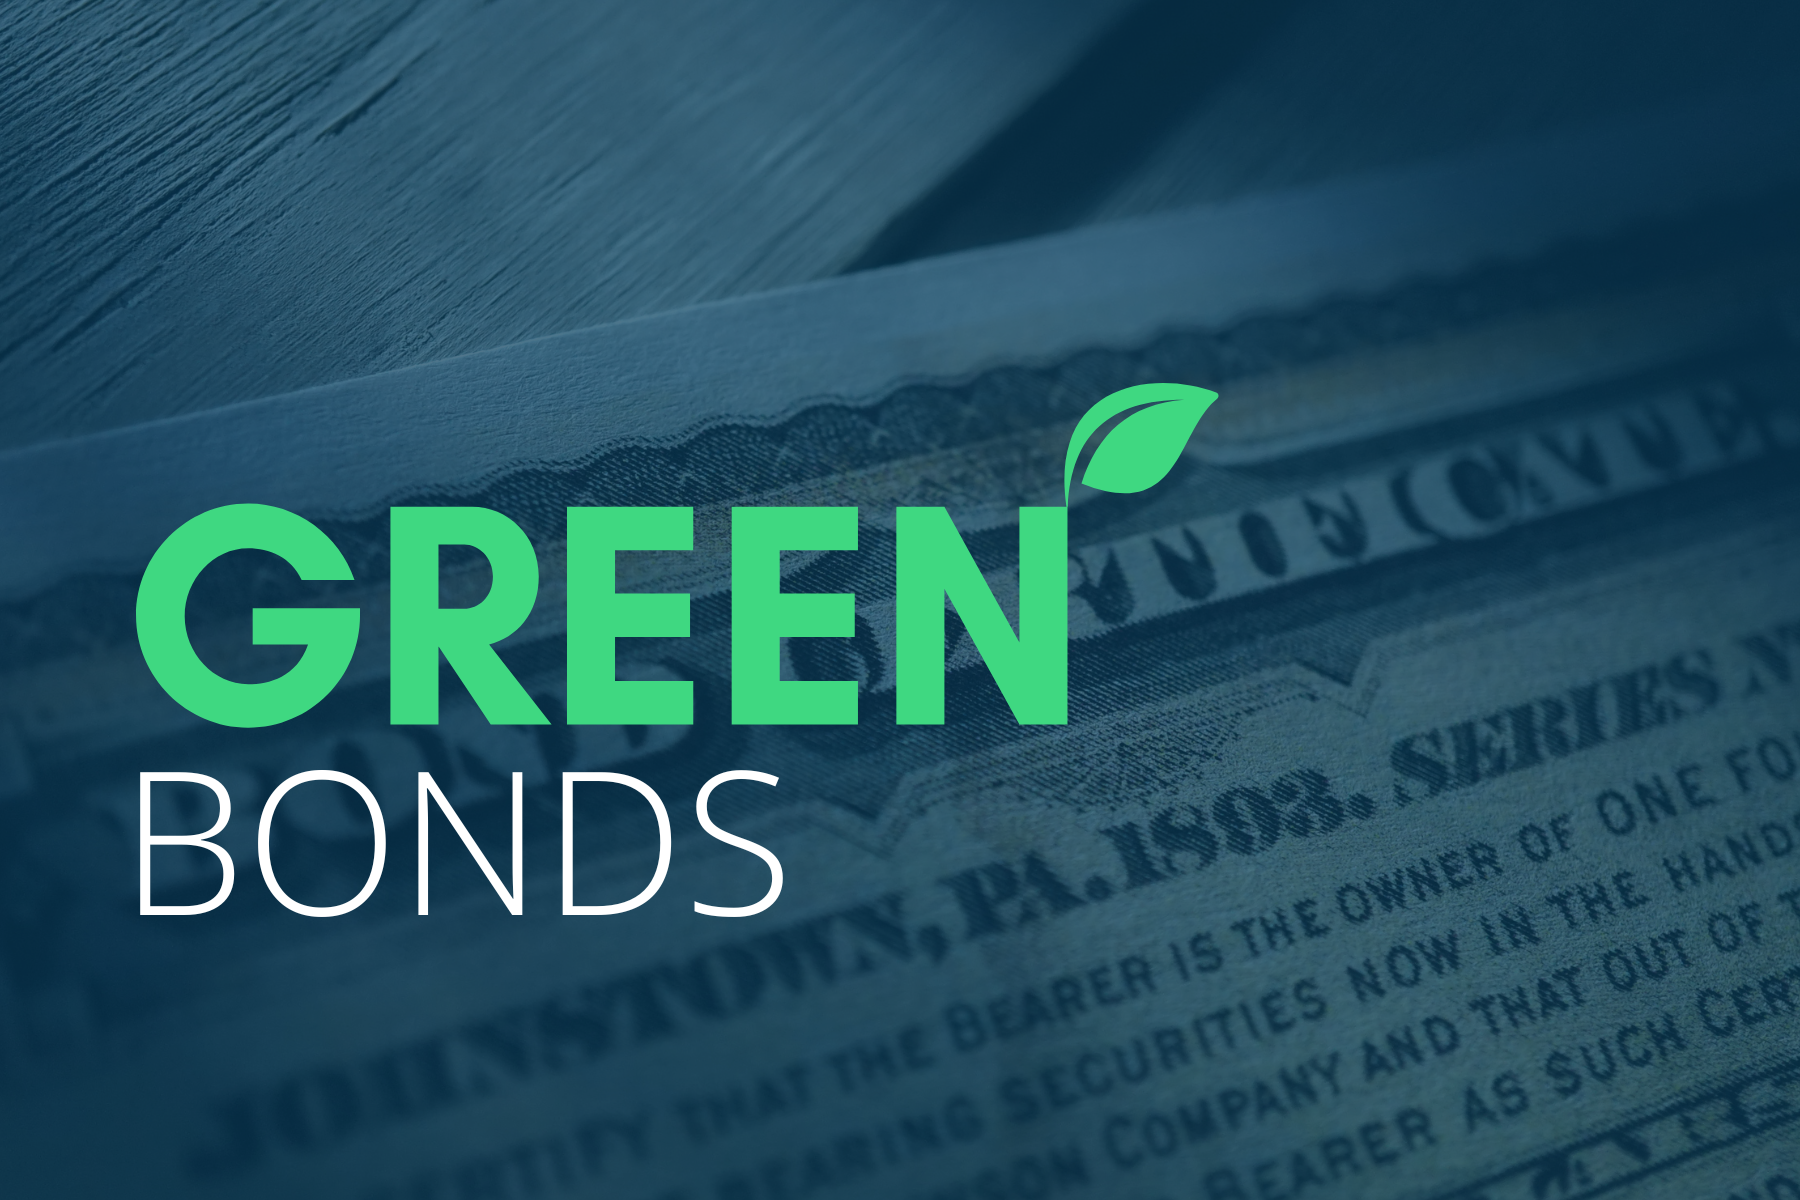 January 23, 2023 – Newsletter – What is a Green Bond?